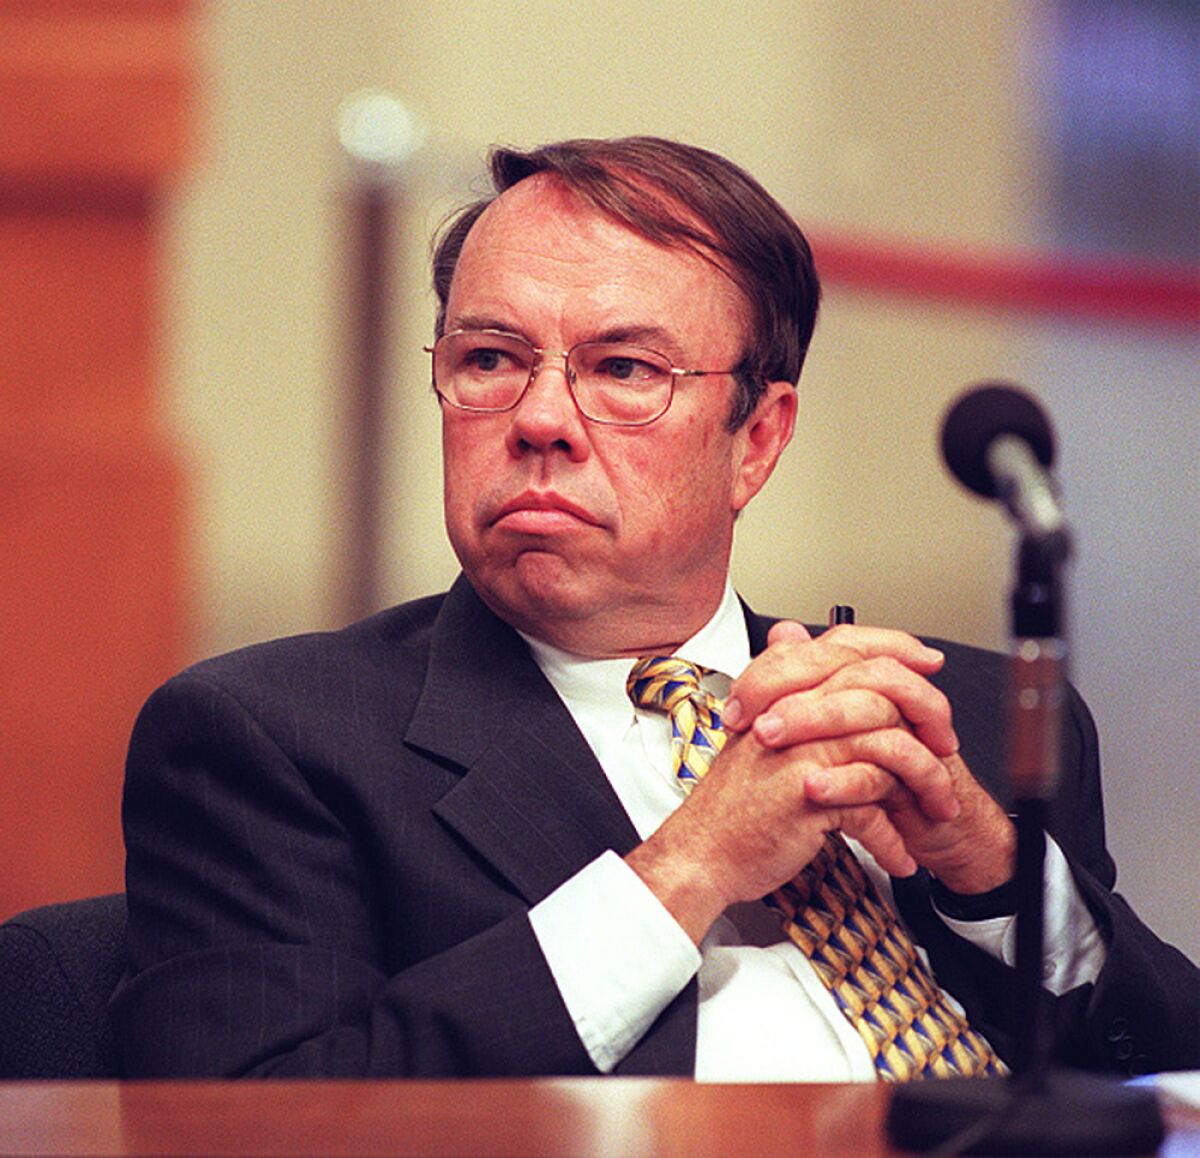 Ron Deaton, shown in 2000, served as L.A.'s chief legislative analyst and also headed the Department of Water and Power.